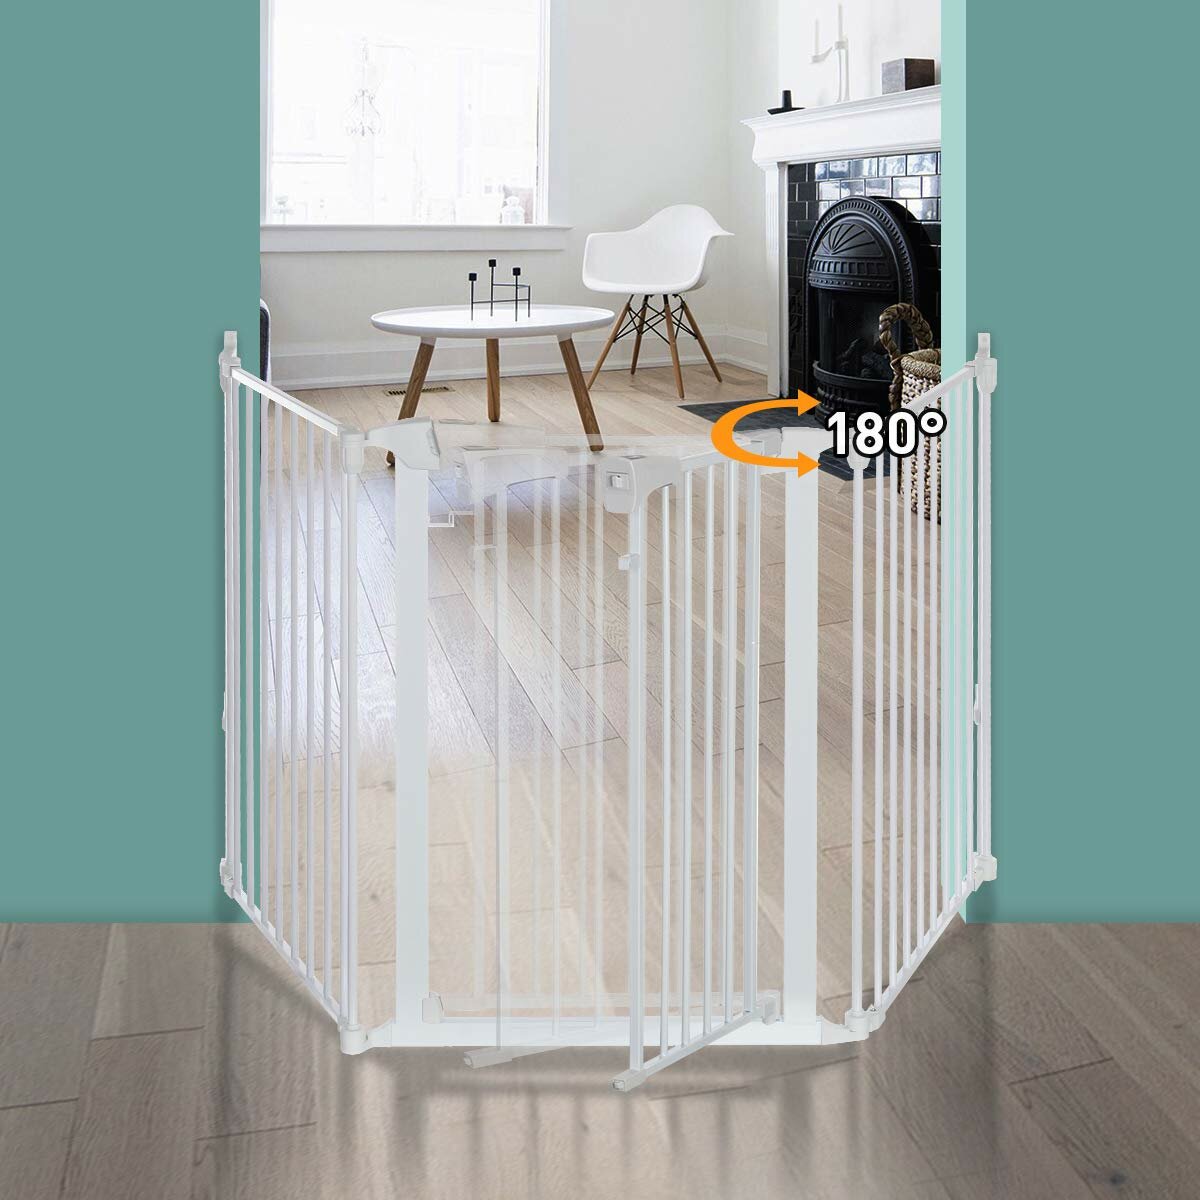 KINGSO White/Black Adjustable Auto Close Metal Baby Gate with Swing Door For Doorway Stairs